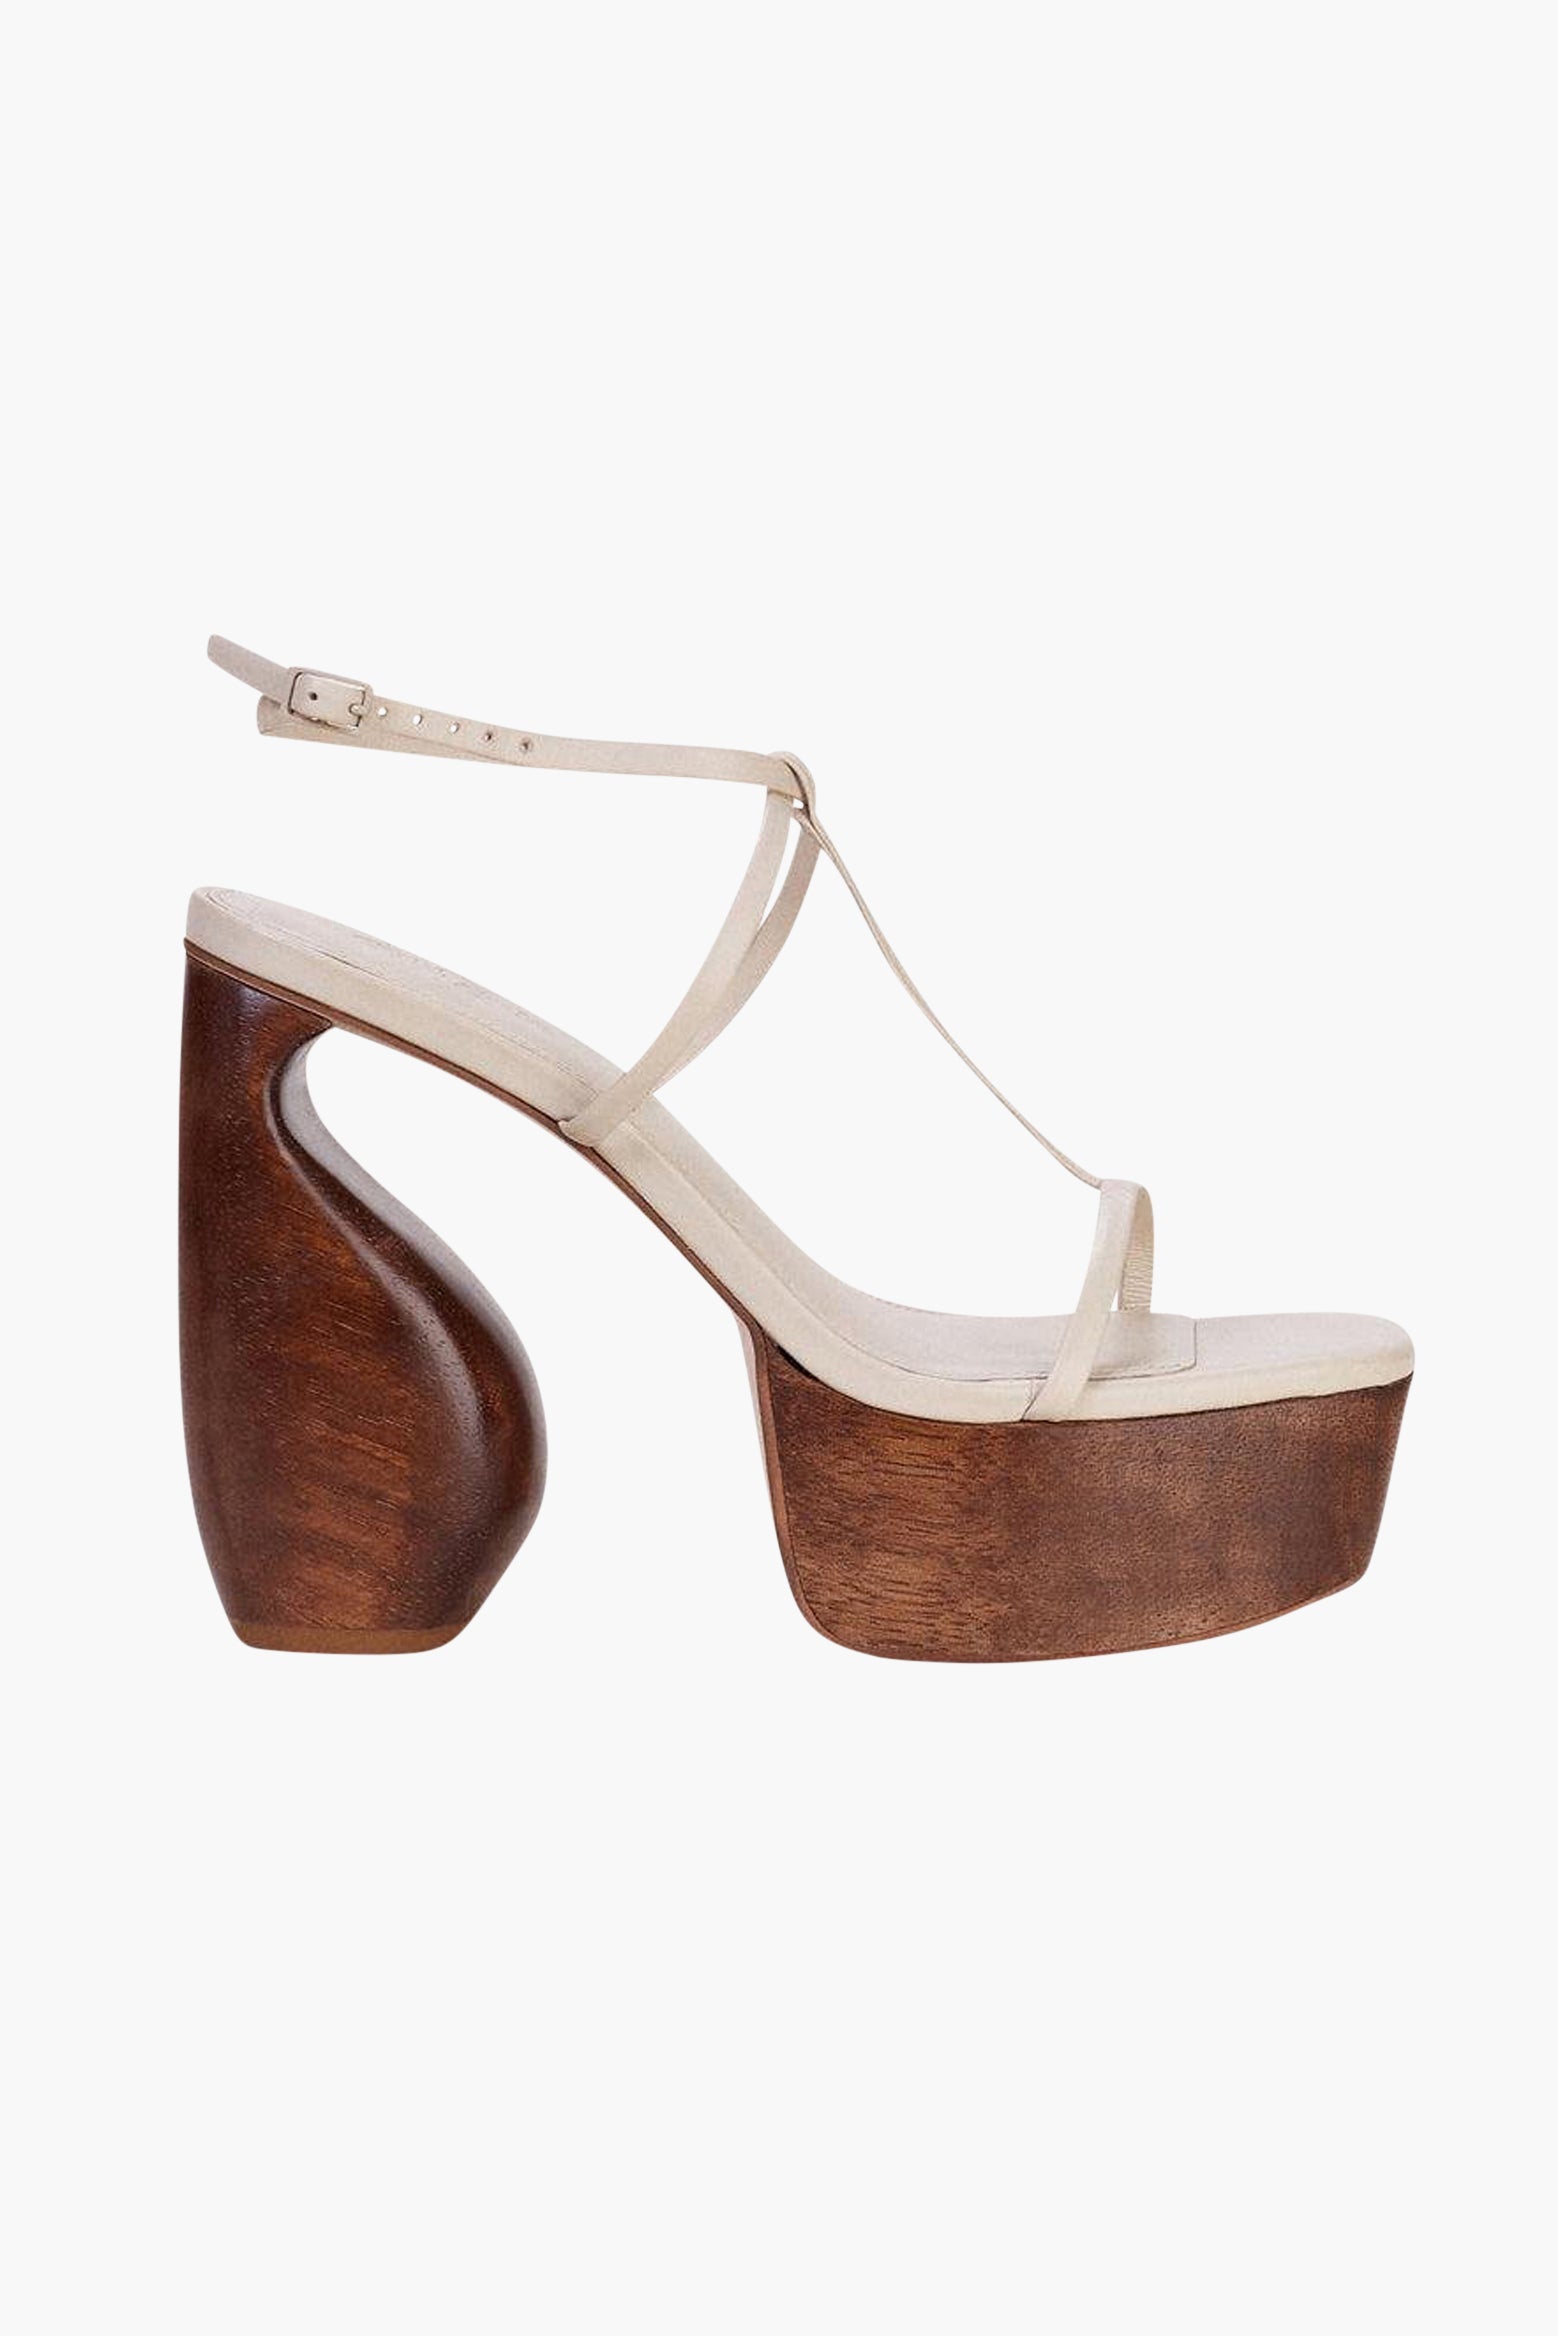 Cult Gaia Chiara Platform in Off-White available at The New Trend